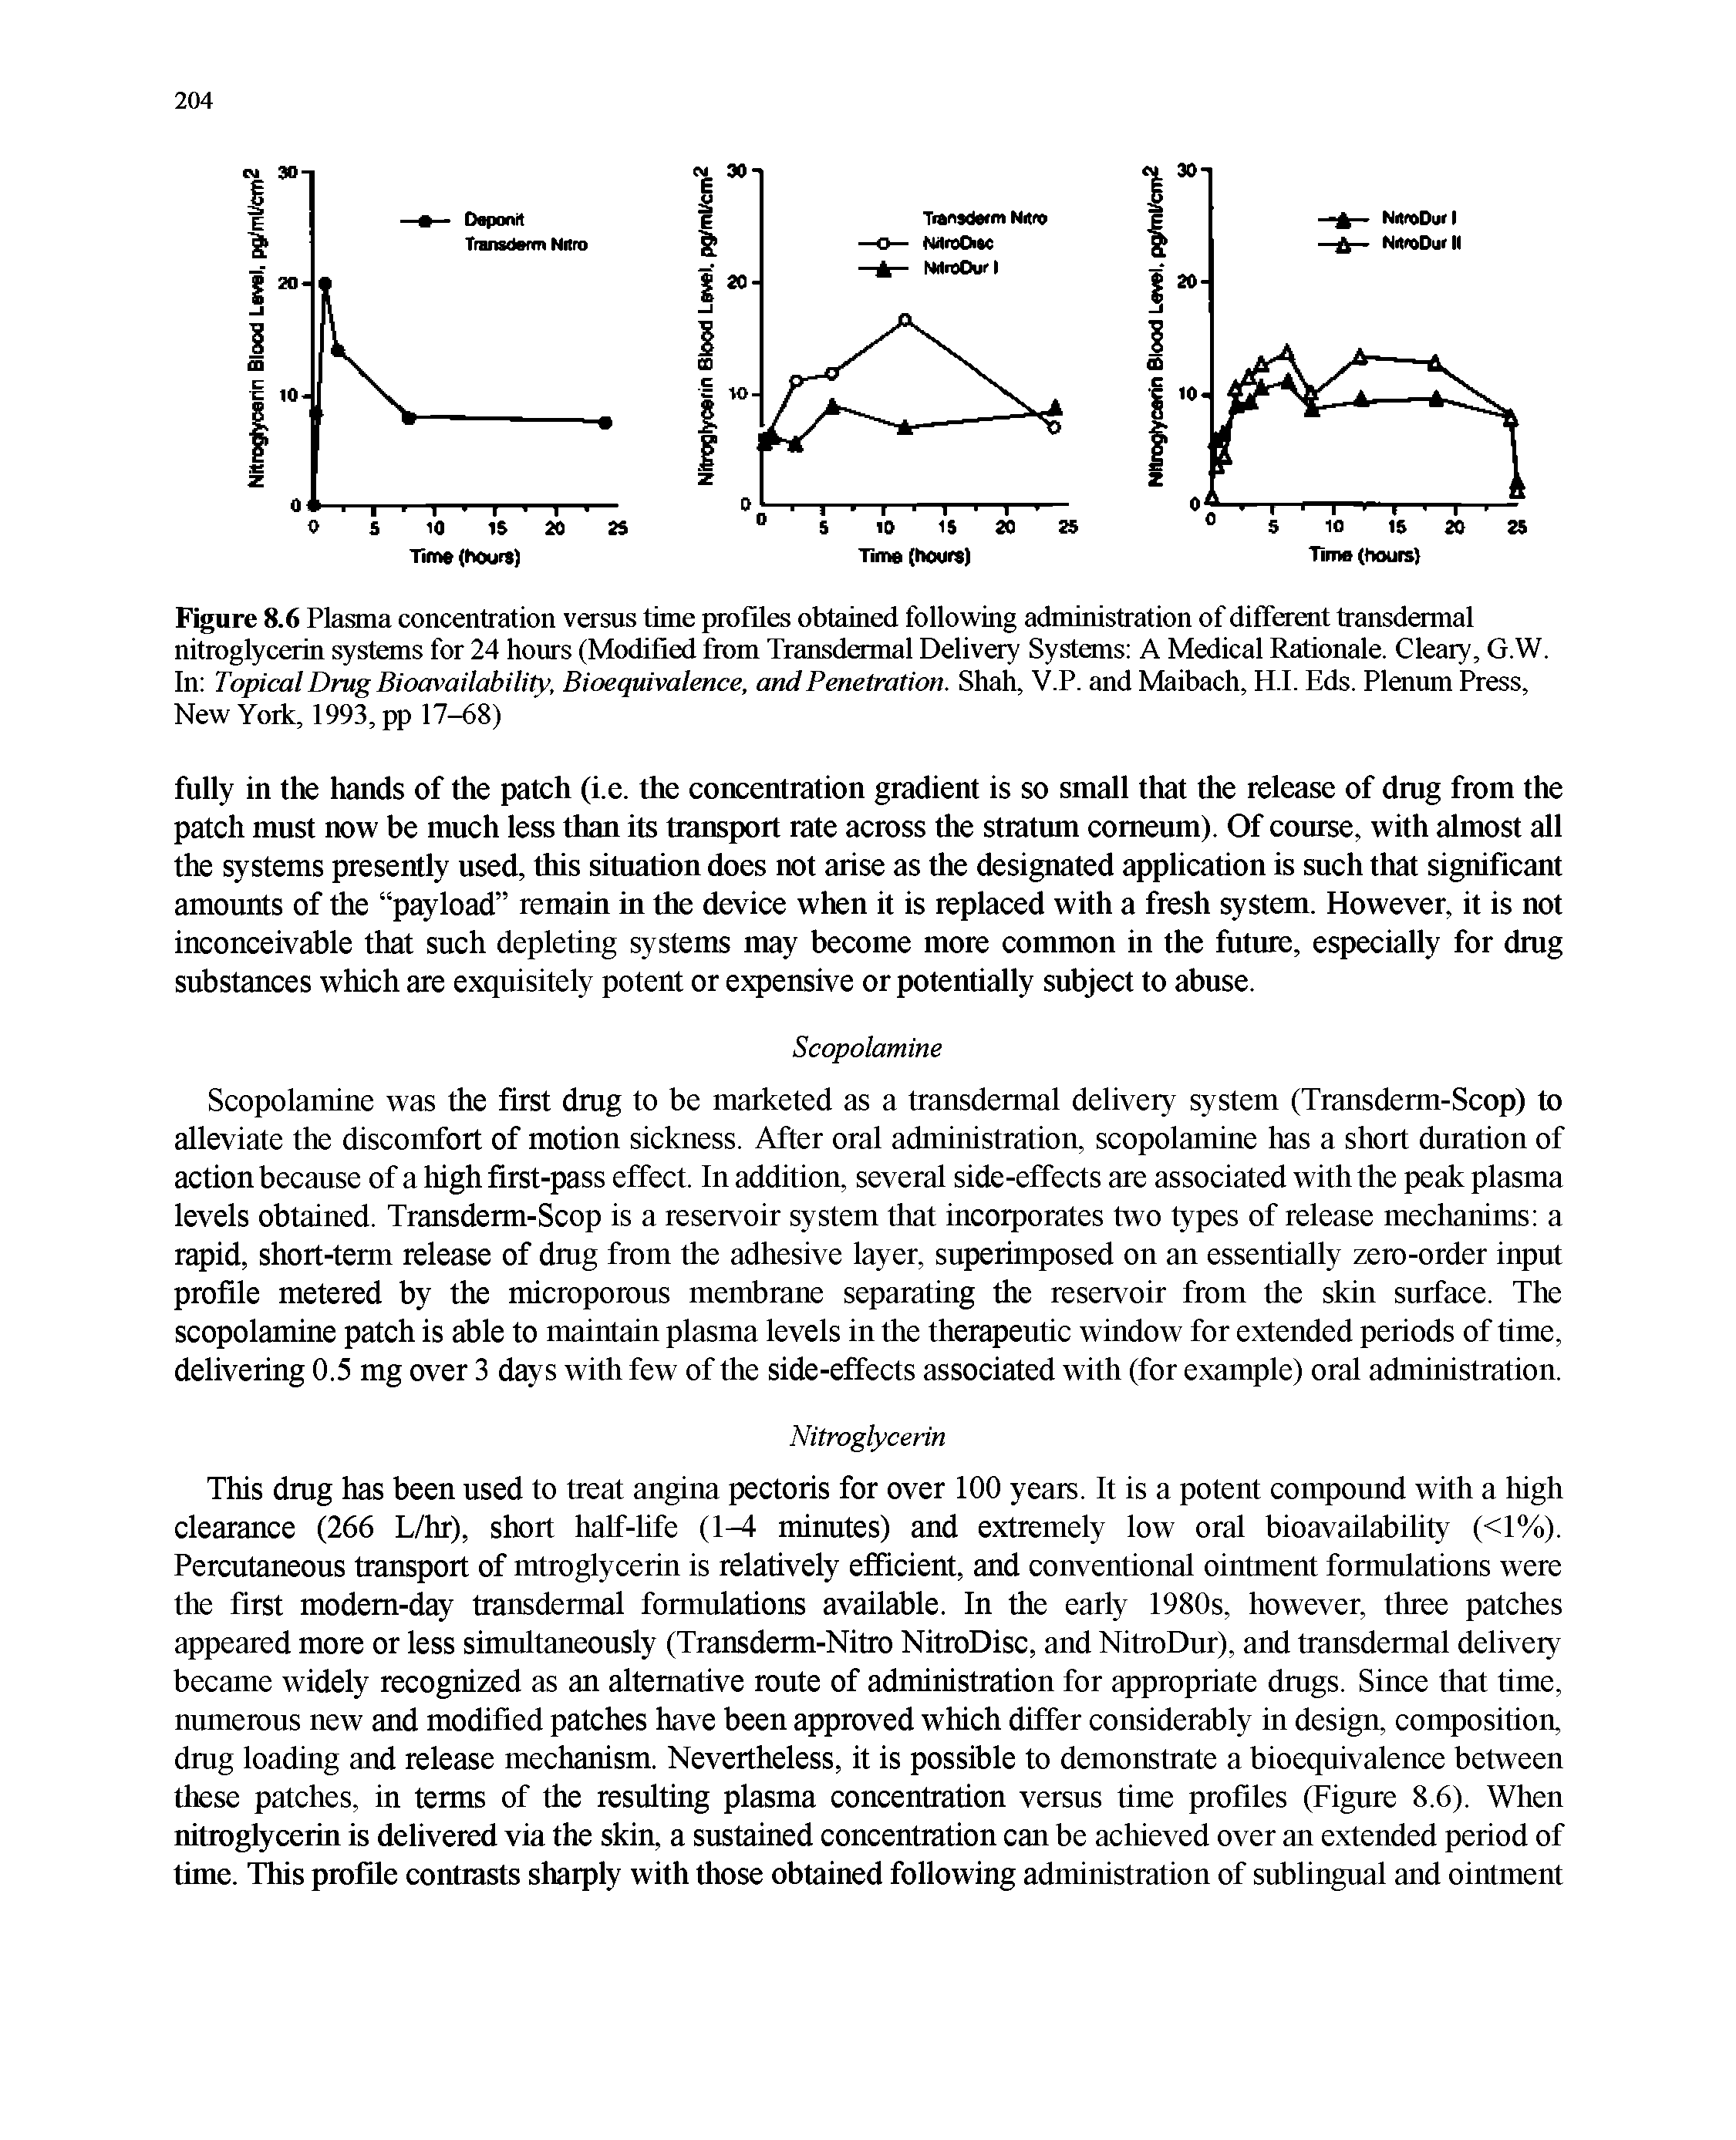 Figure 8.6 Plasma concentration versus time profiles obtained following administration of different transdermal nitroglycerin systems for 24 hours (Modified from Transdermal Delivery Systems A Medical Rationale. Cleary, G.W. In Topical Drug Bioavailability, Bioequivalence, and Penetration. Shah, V.P. and Maibach, H.I. Eds. Plenum Press, New York, 1993, pp 17-68)...